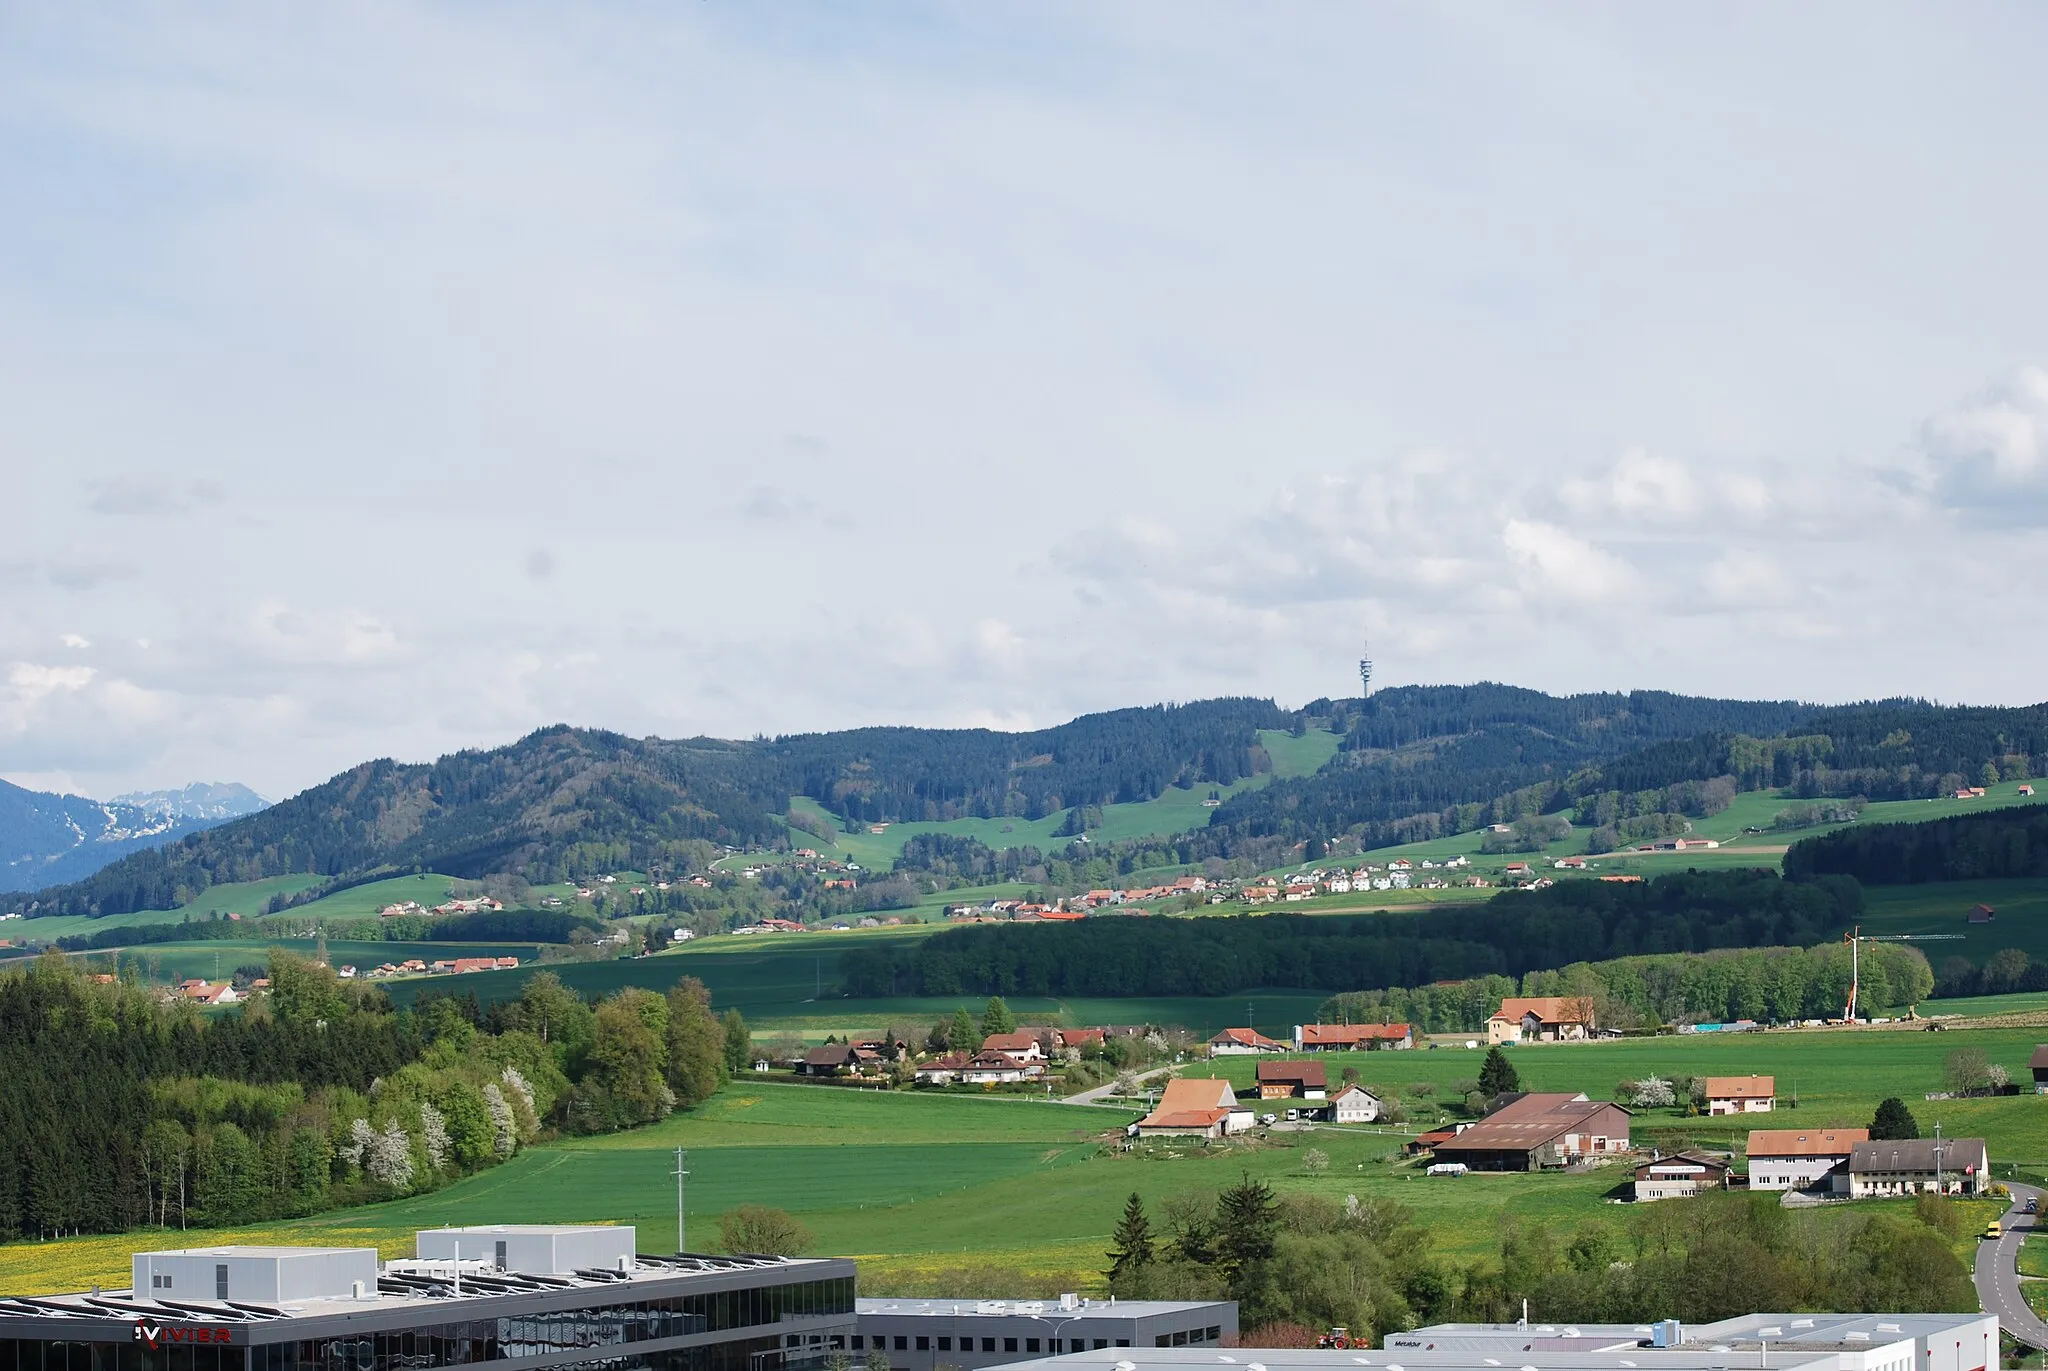 Photo showing: Mount Gibloux seen from Villaz-Saint-Pierre, canton of Fribourg, Switzerland - Mount Gibloux with the Swisscom tower in the back